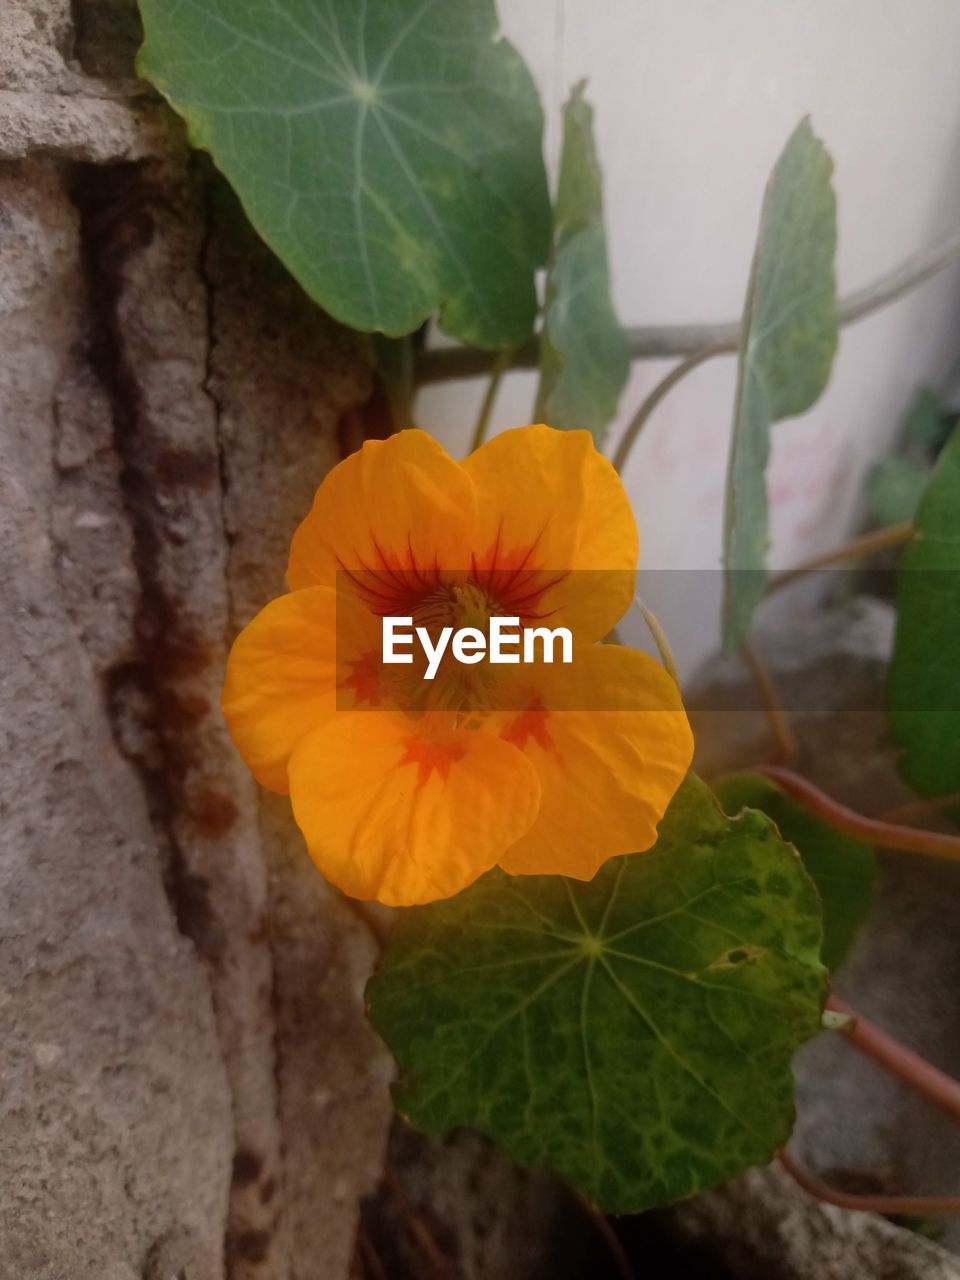 plant, flower, flowering plant, freshness, leaf, plant part, yellow, beauty in nature, nature, growth, close-up, flower head, petal, fragility, inflorescence, no people, outdoors, green, food, orange color, botany, day